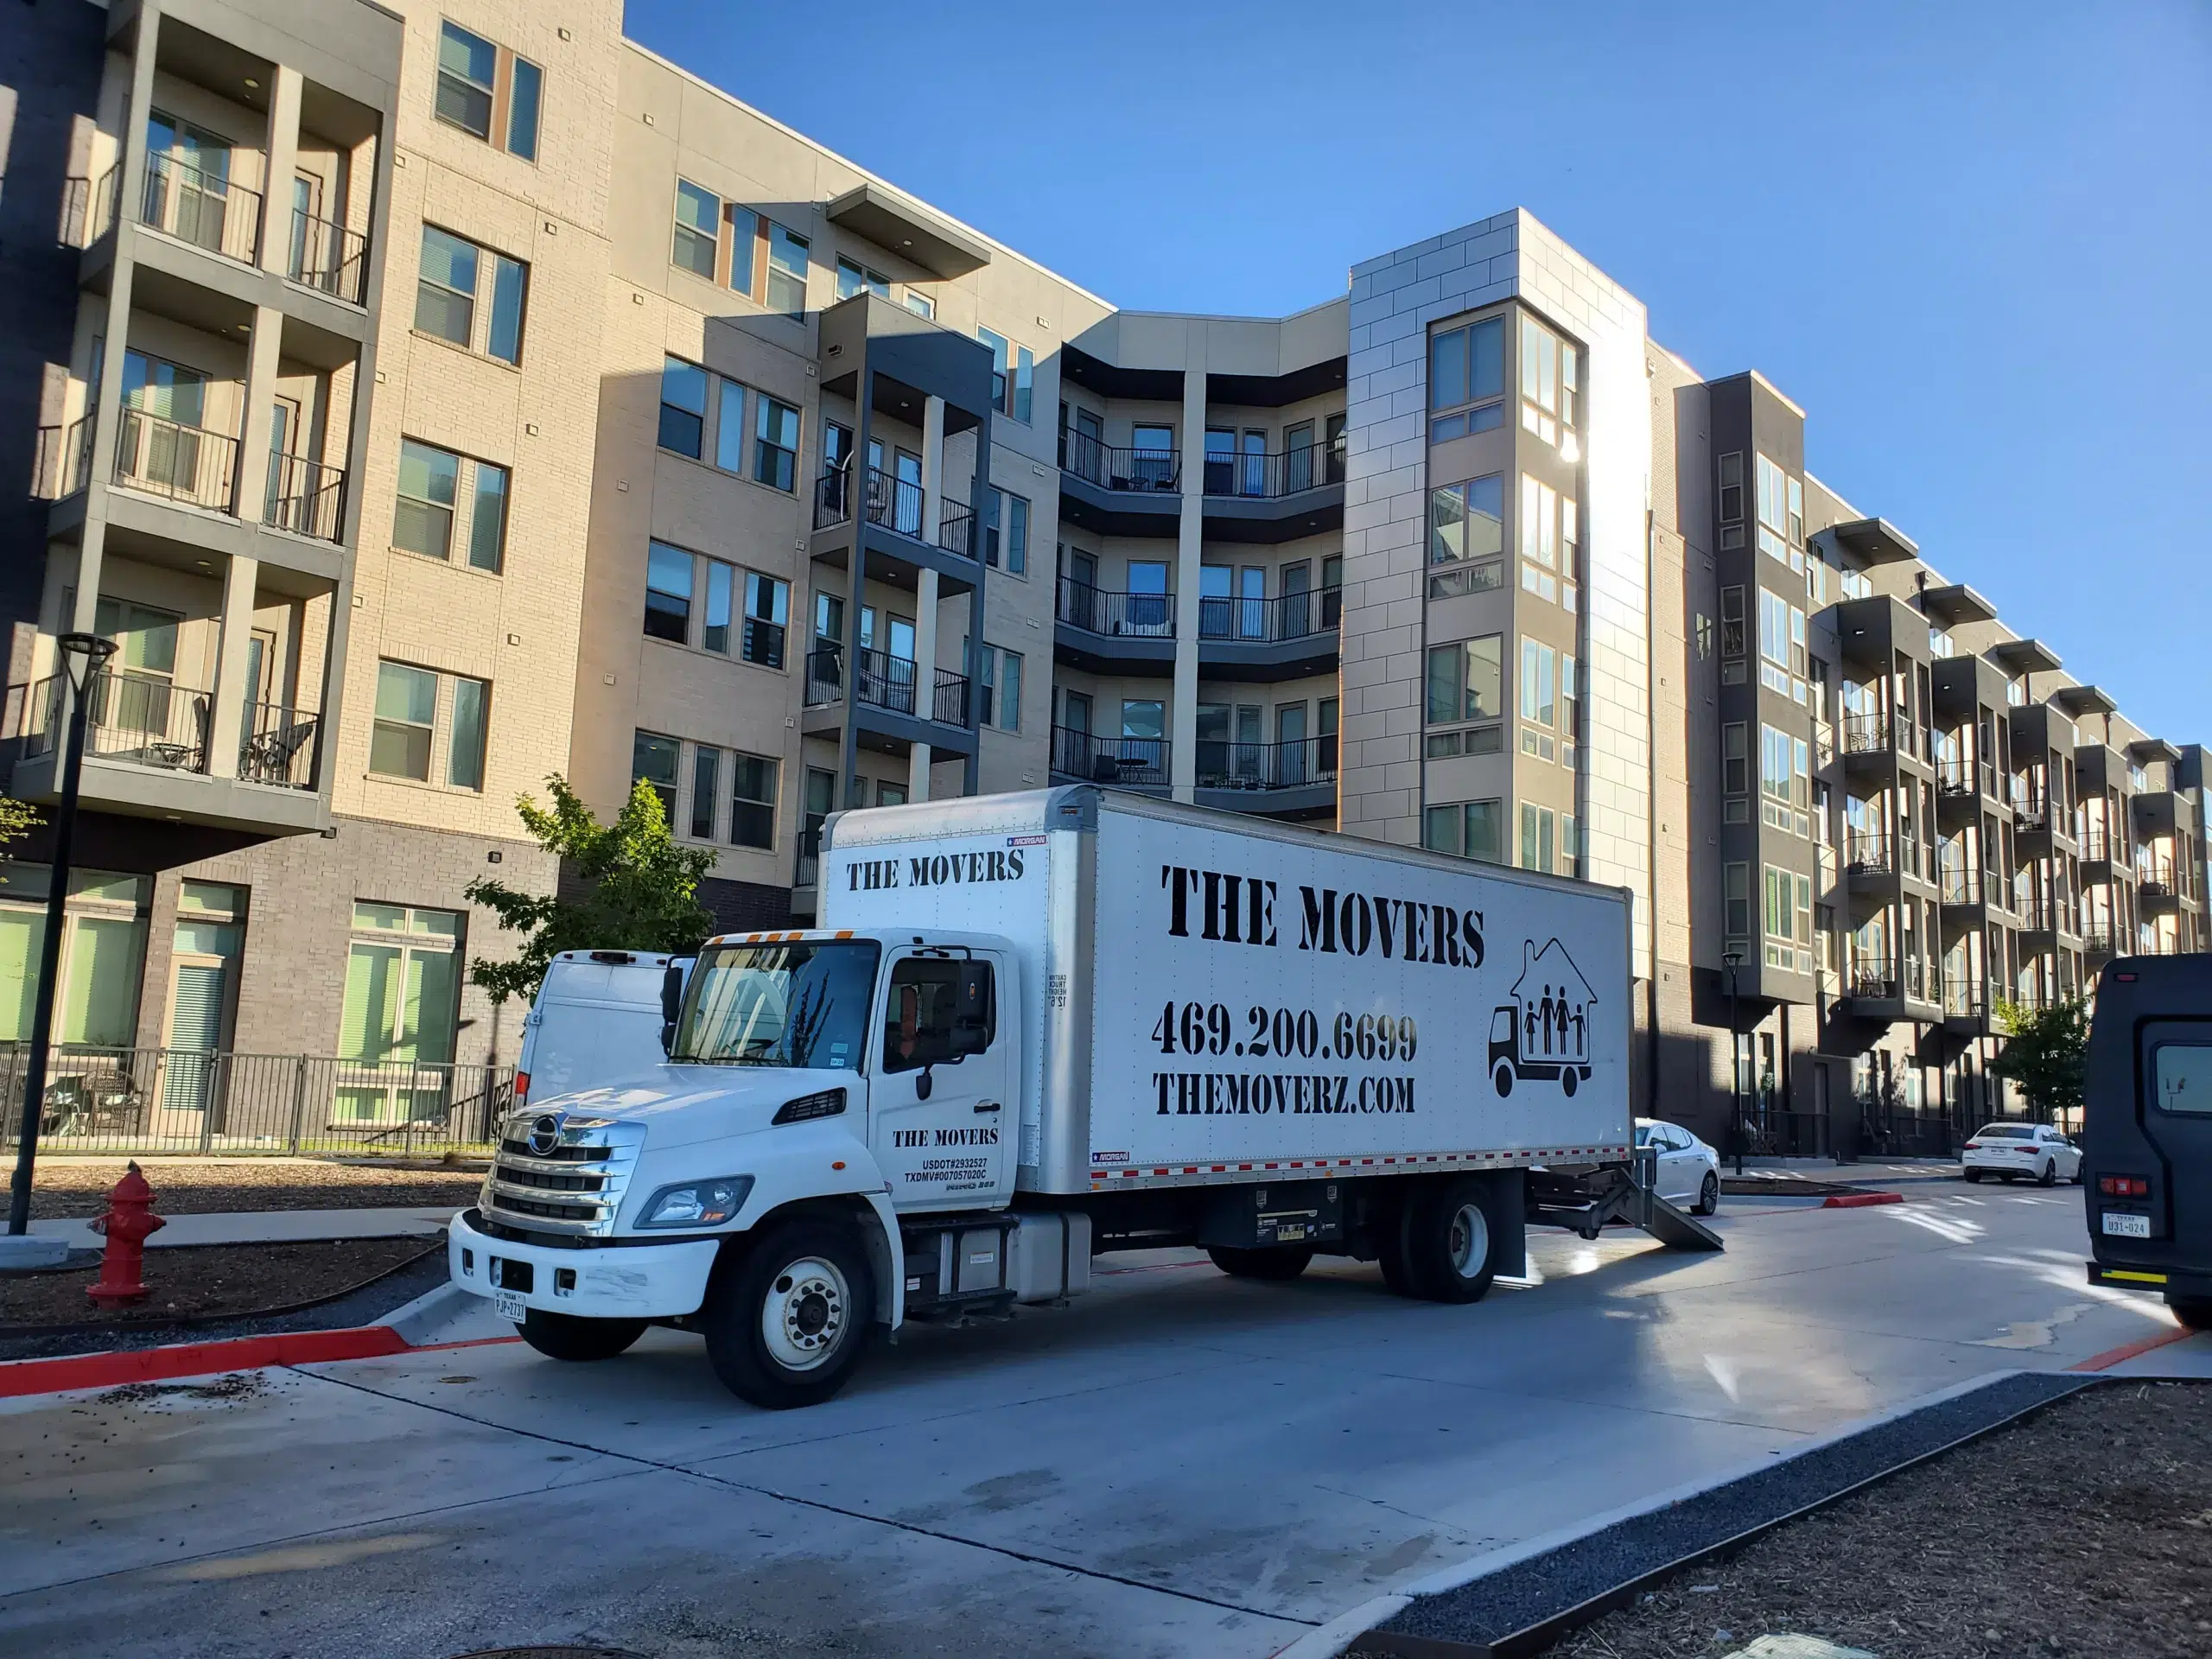 local apartment movers